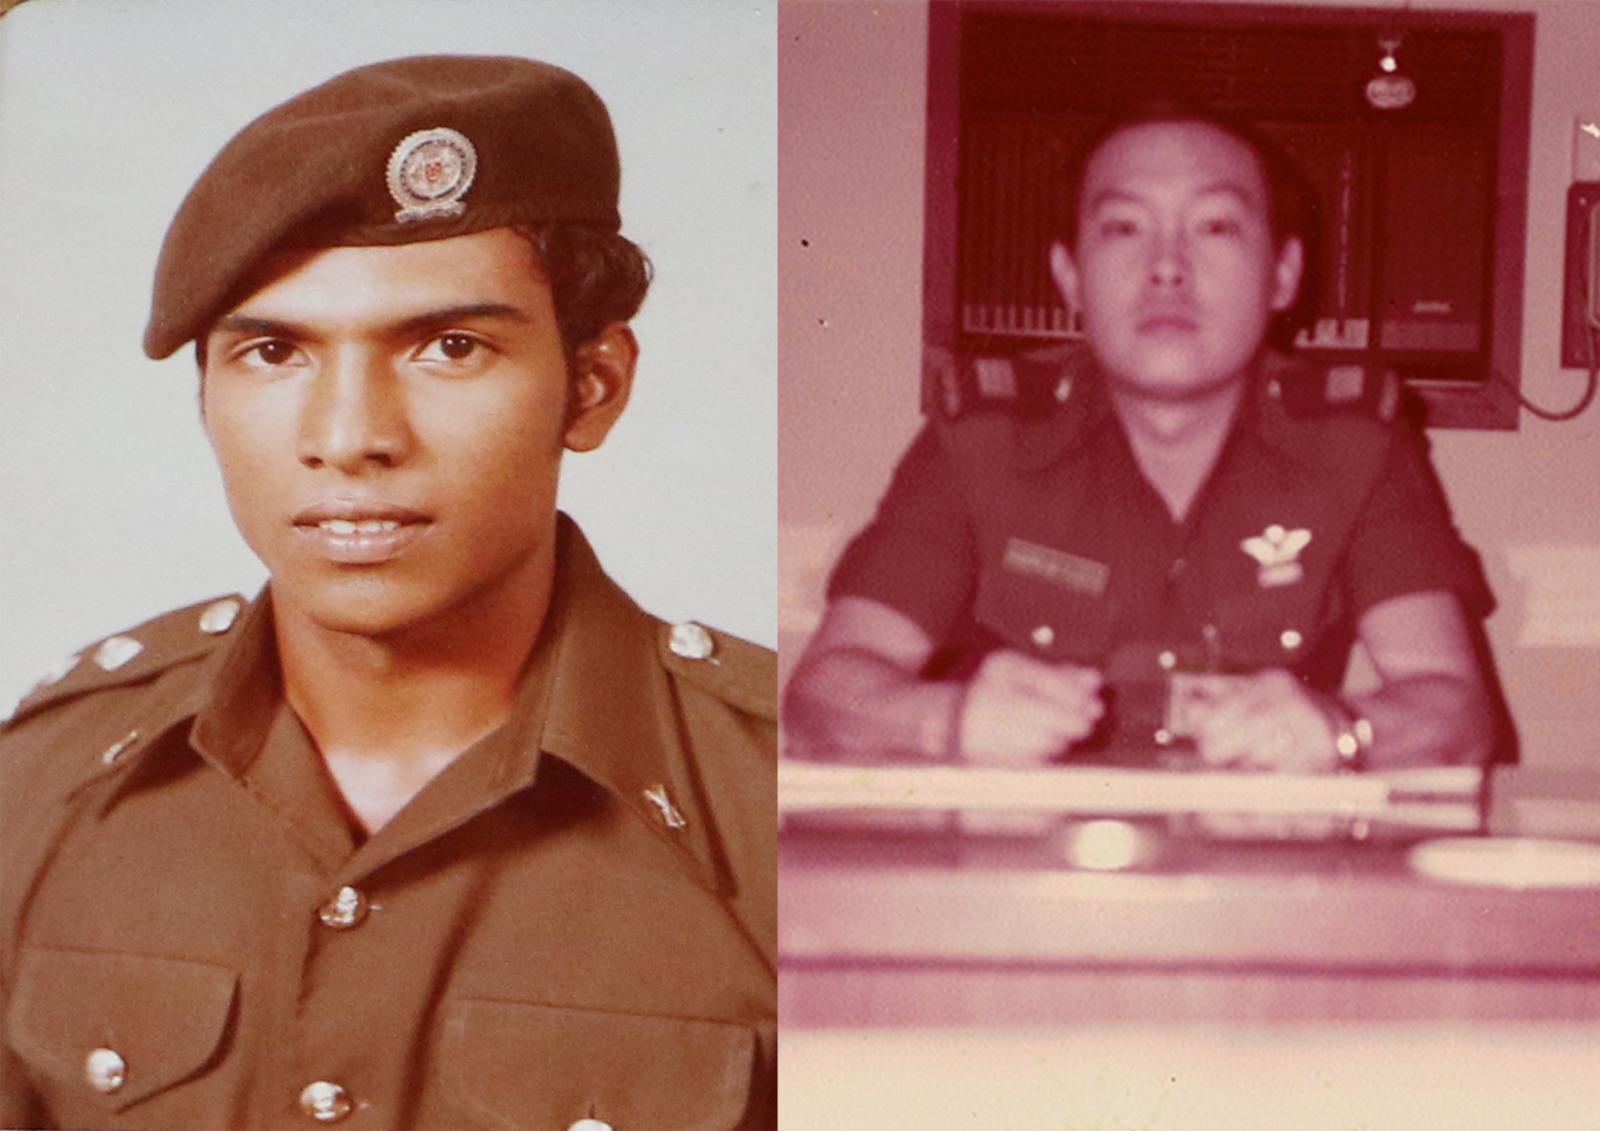 Suresh (left) and Andrew (right) during their service days.